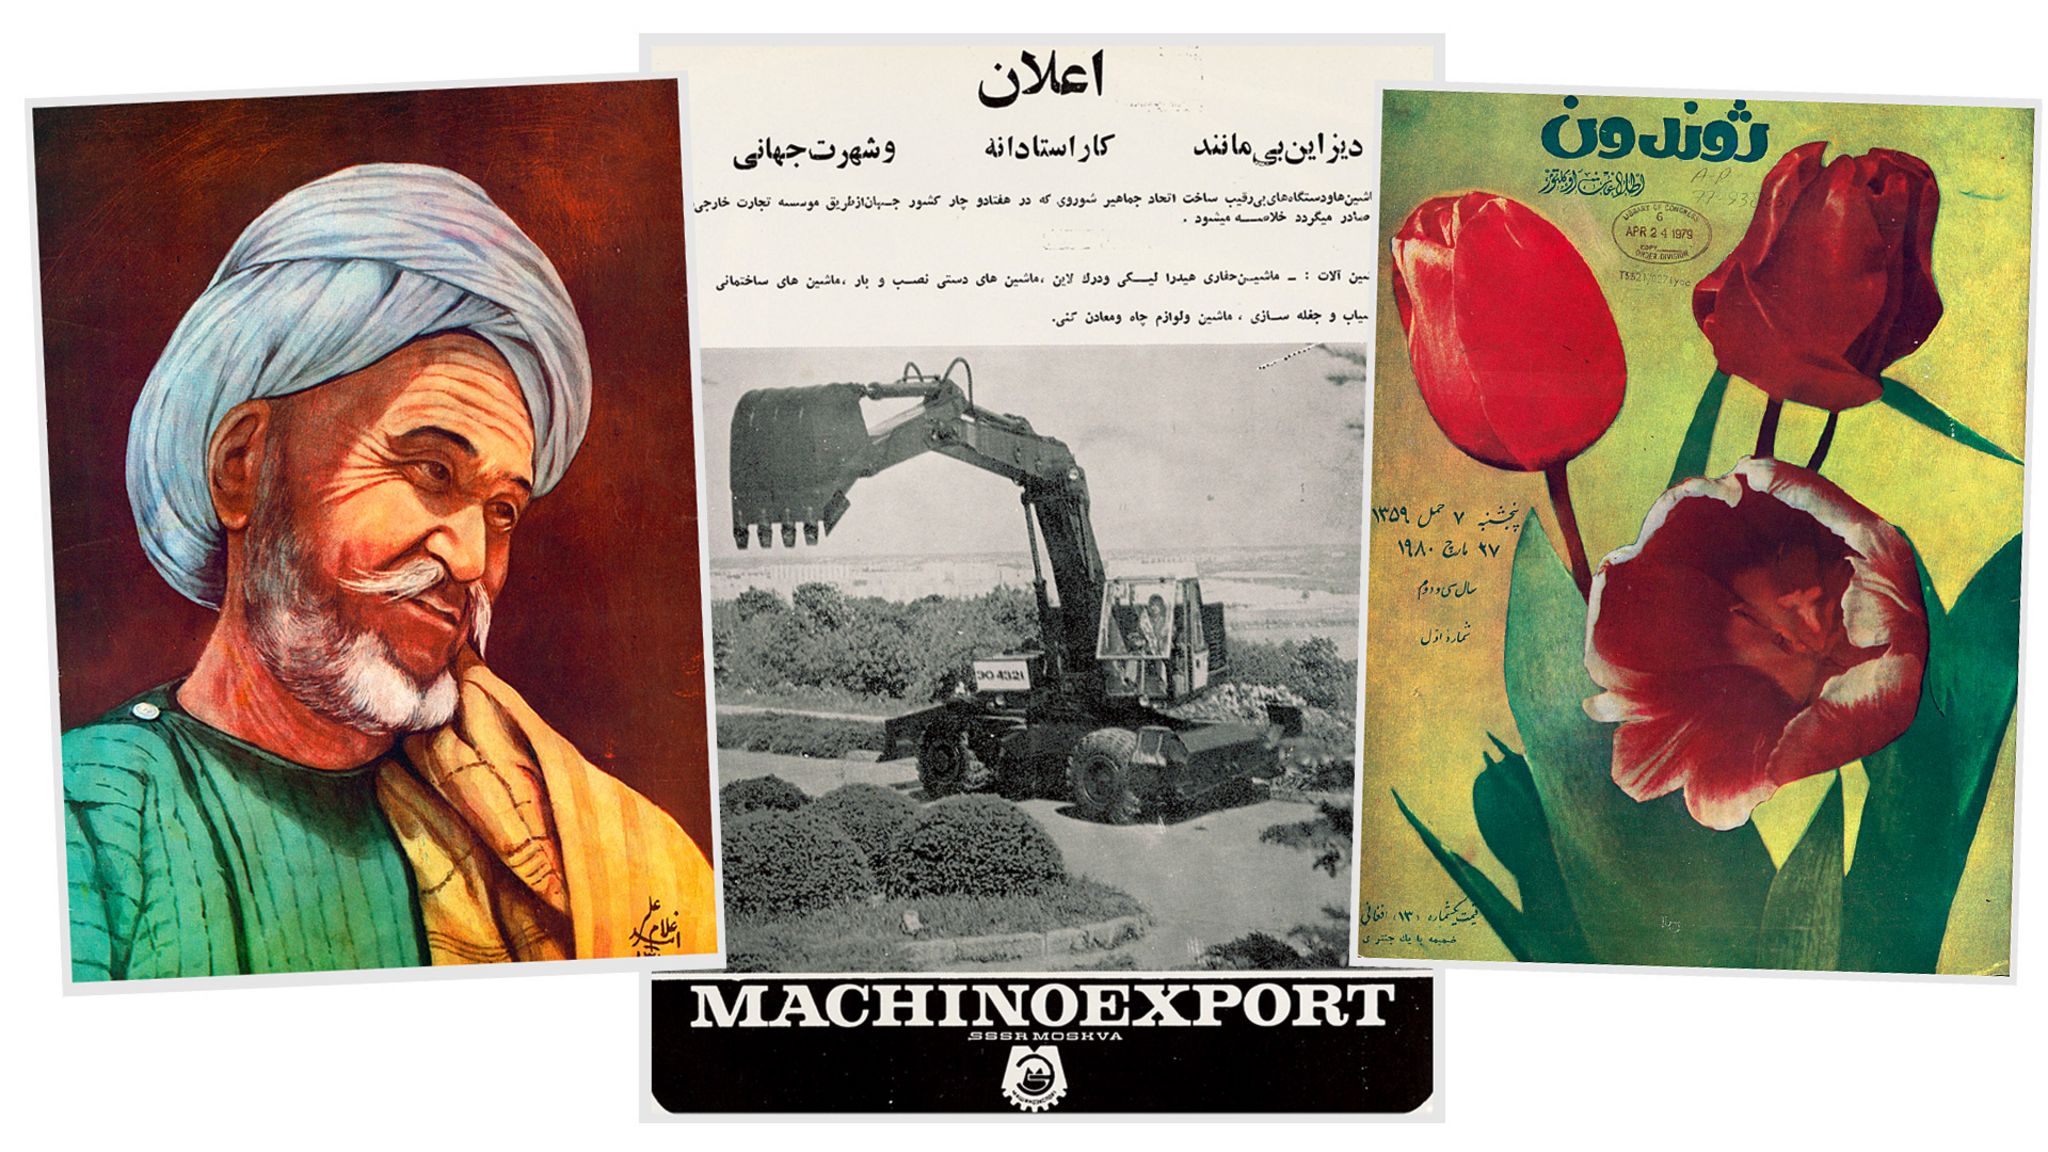 Pages from Afghan magazine Zhvandun - reflecting the Soviet influence post-1979